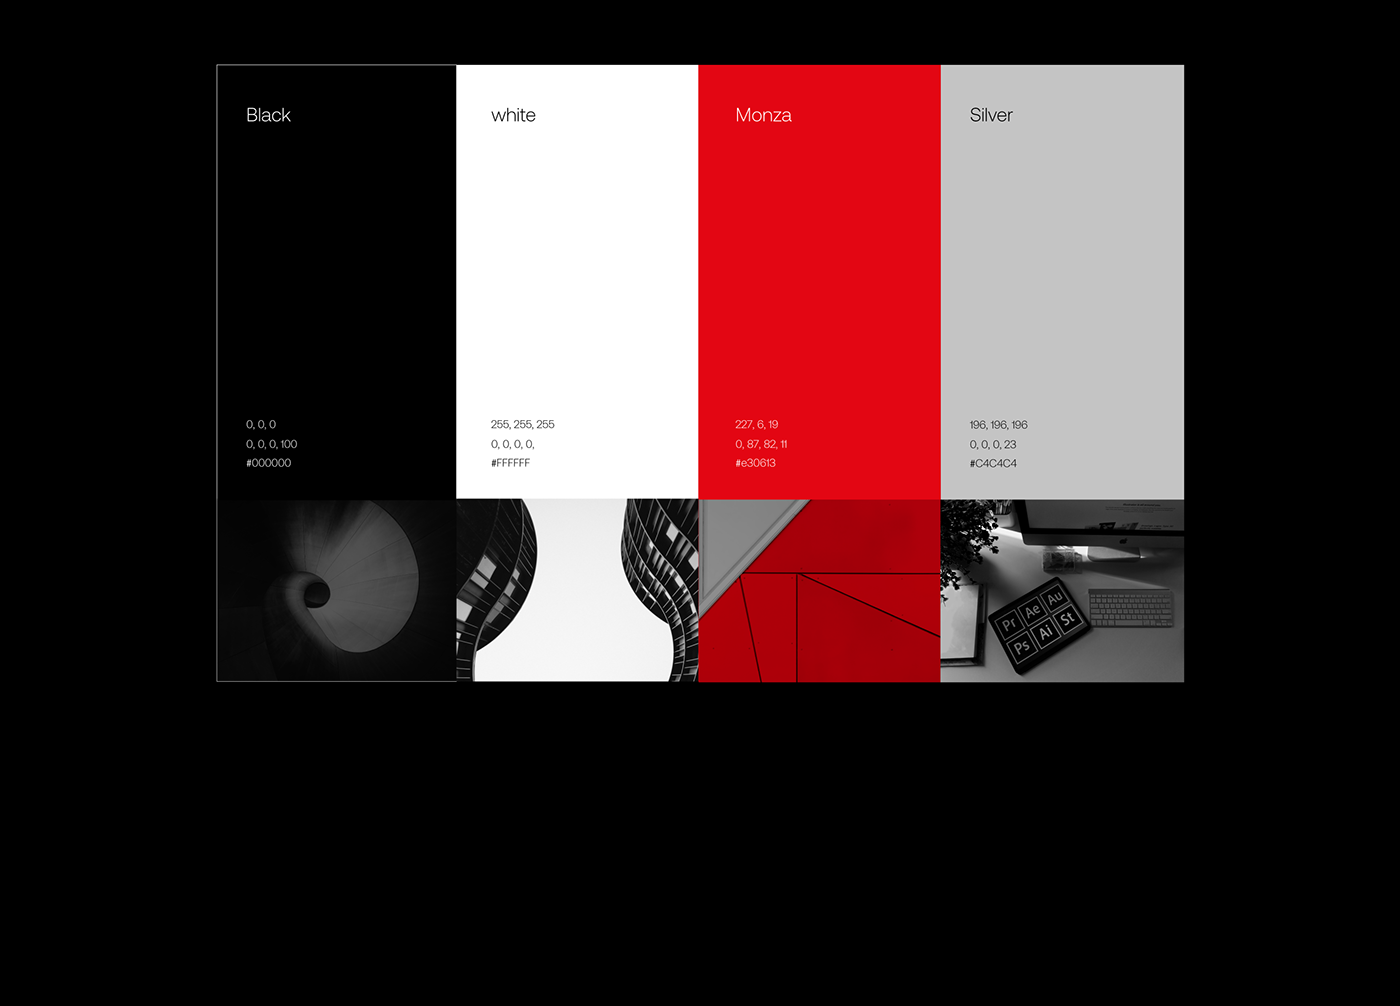 Abstract Art black and red black and white brand guidelines brand identity futuristic graphic design agency smoke team logo visual identity